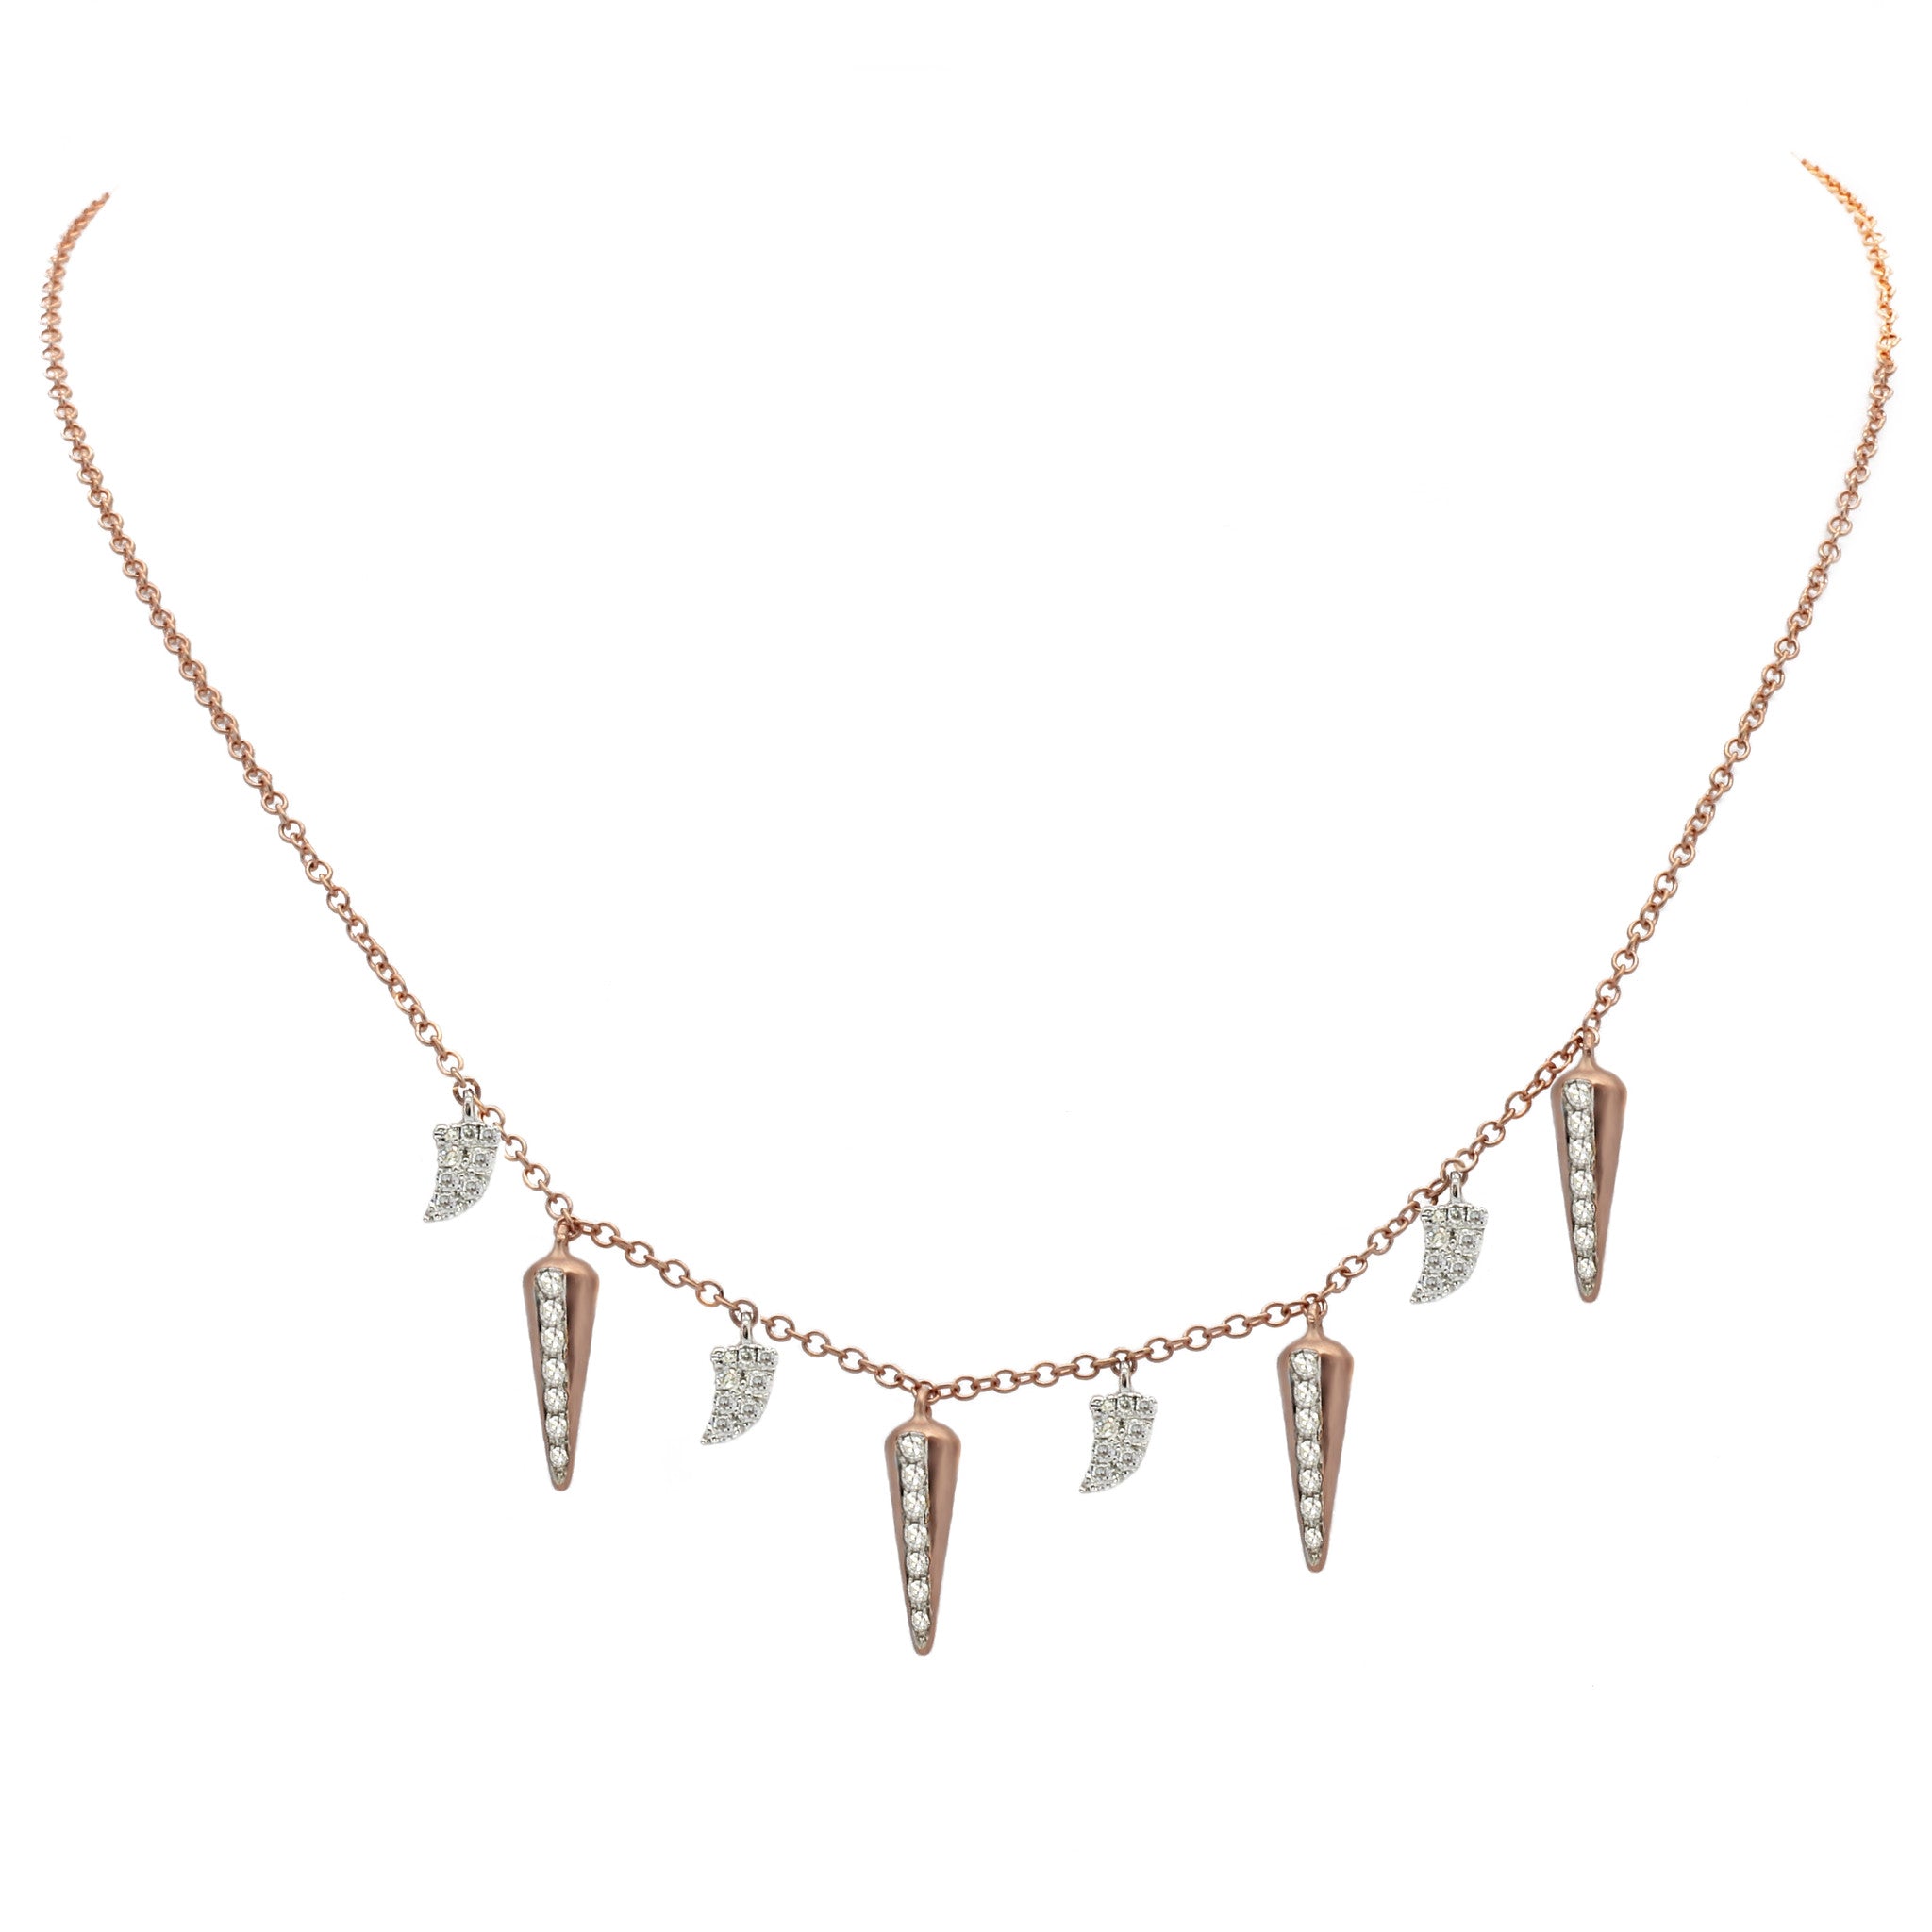 Meira T 14k Pink Gold Tusk and Spike Necklace